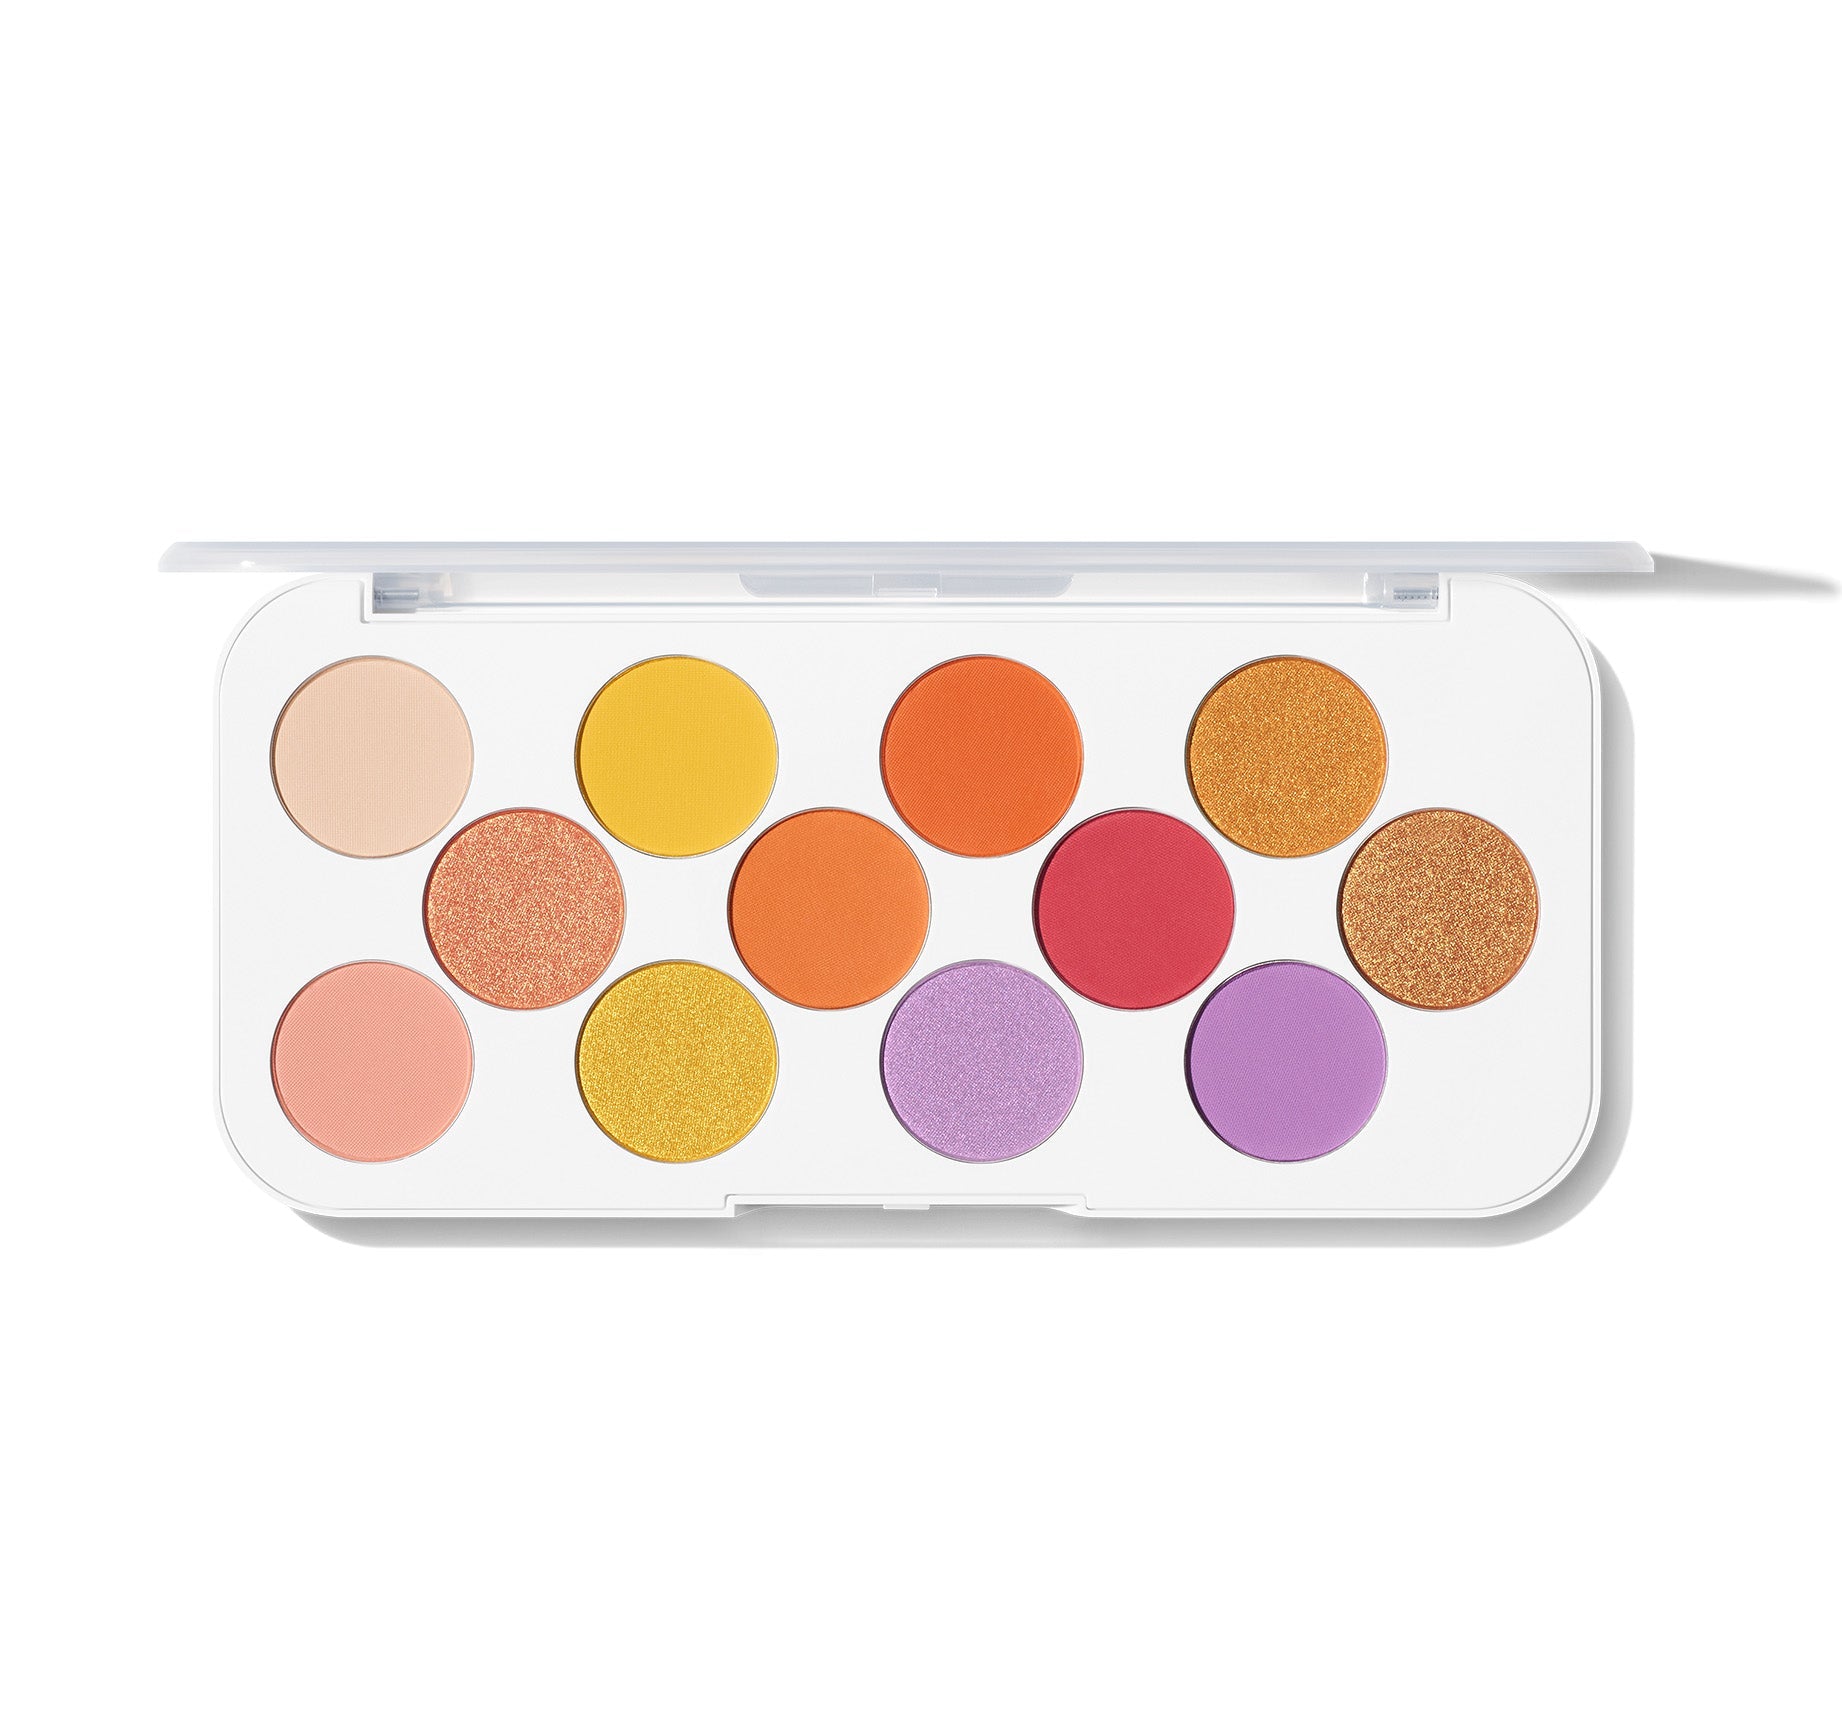 Ready For Anything Eyeshadow Palette - Social Butterfly